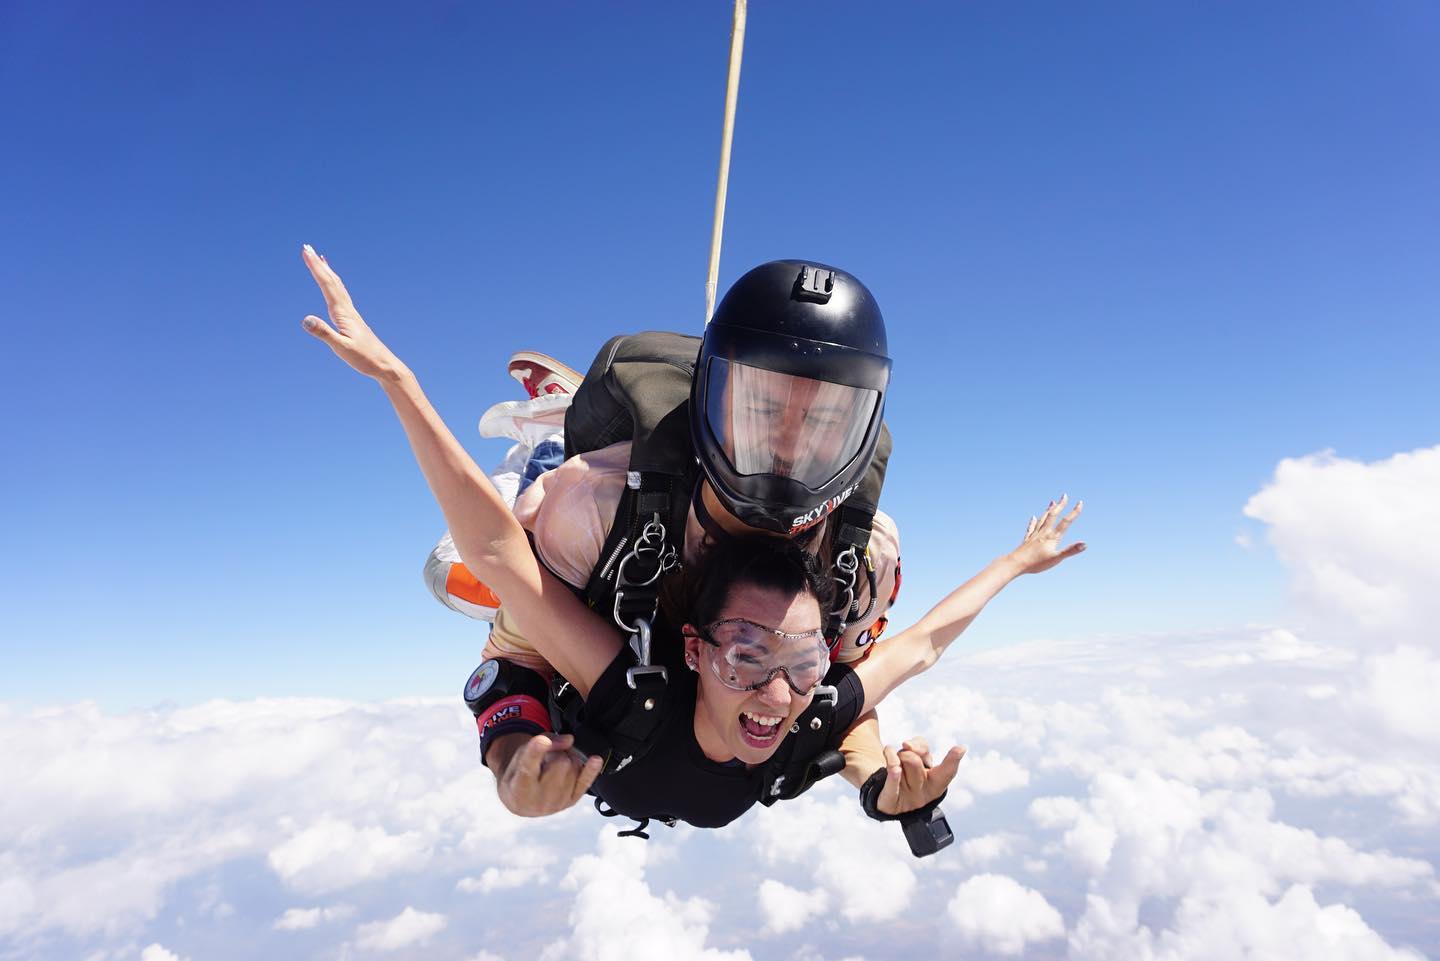 Take a Leap with Skydive Thailand